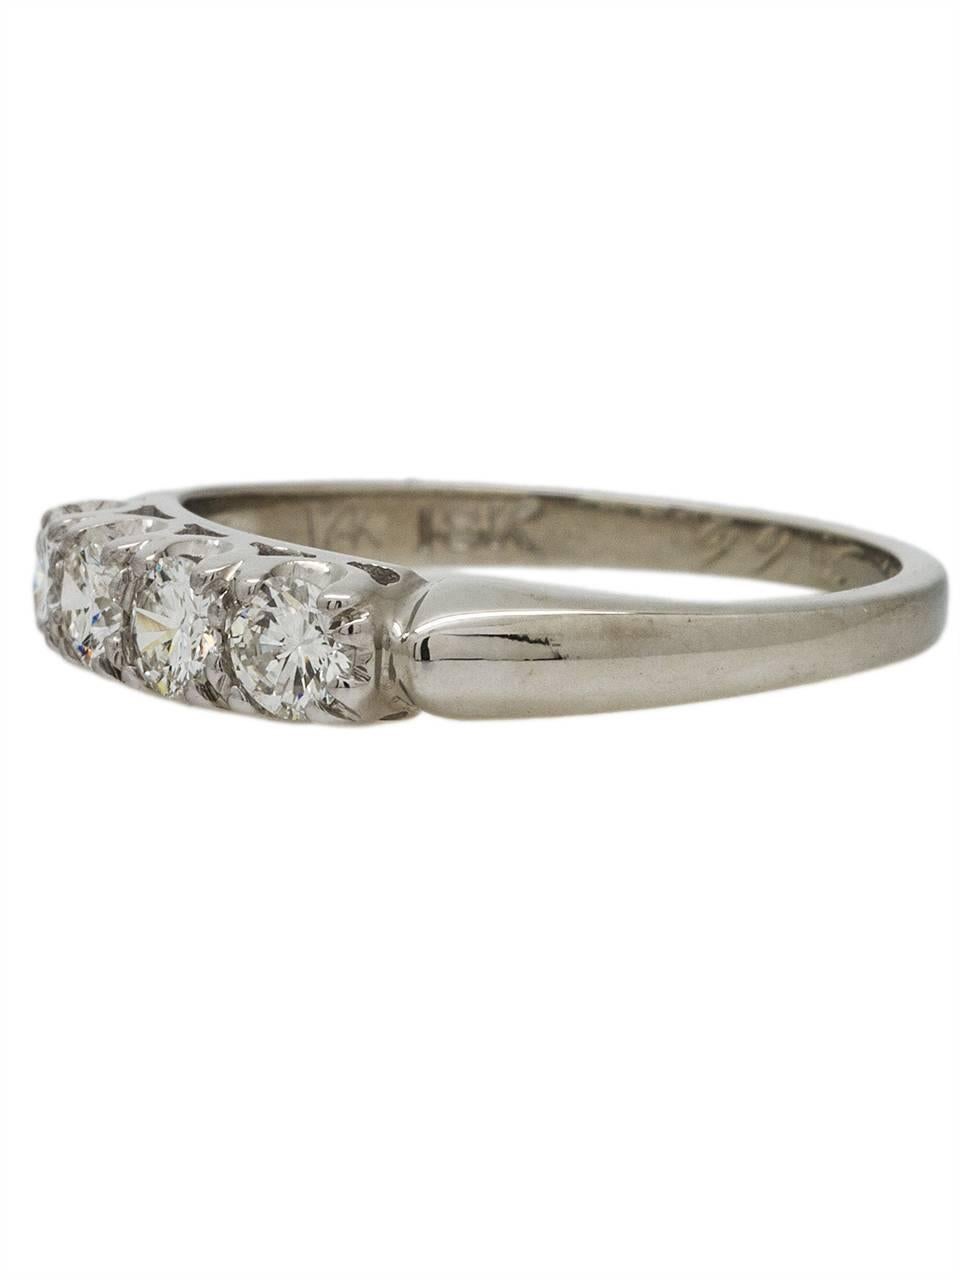 This substantial 18k white gold vintage diamond wedding band is set with 4 full cut modern round brilliant diamonds, total weight .60ct, G/VS2. Lovely bead set mounting with classic fish-tail scroll side galleries. Stands beautifully alone or paired